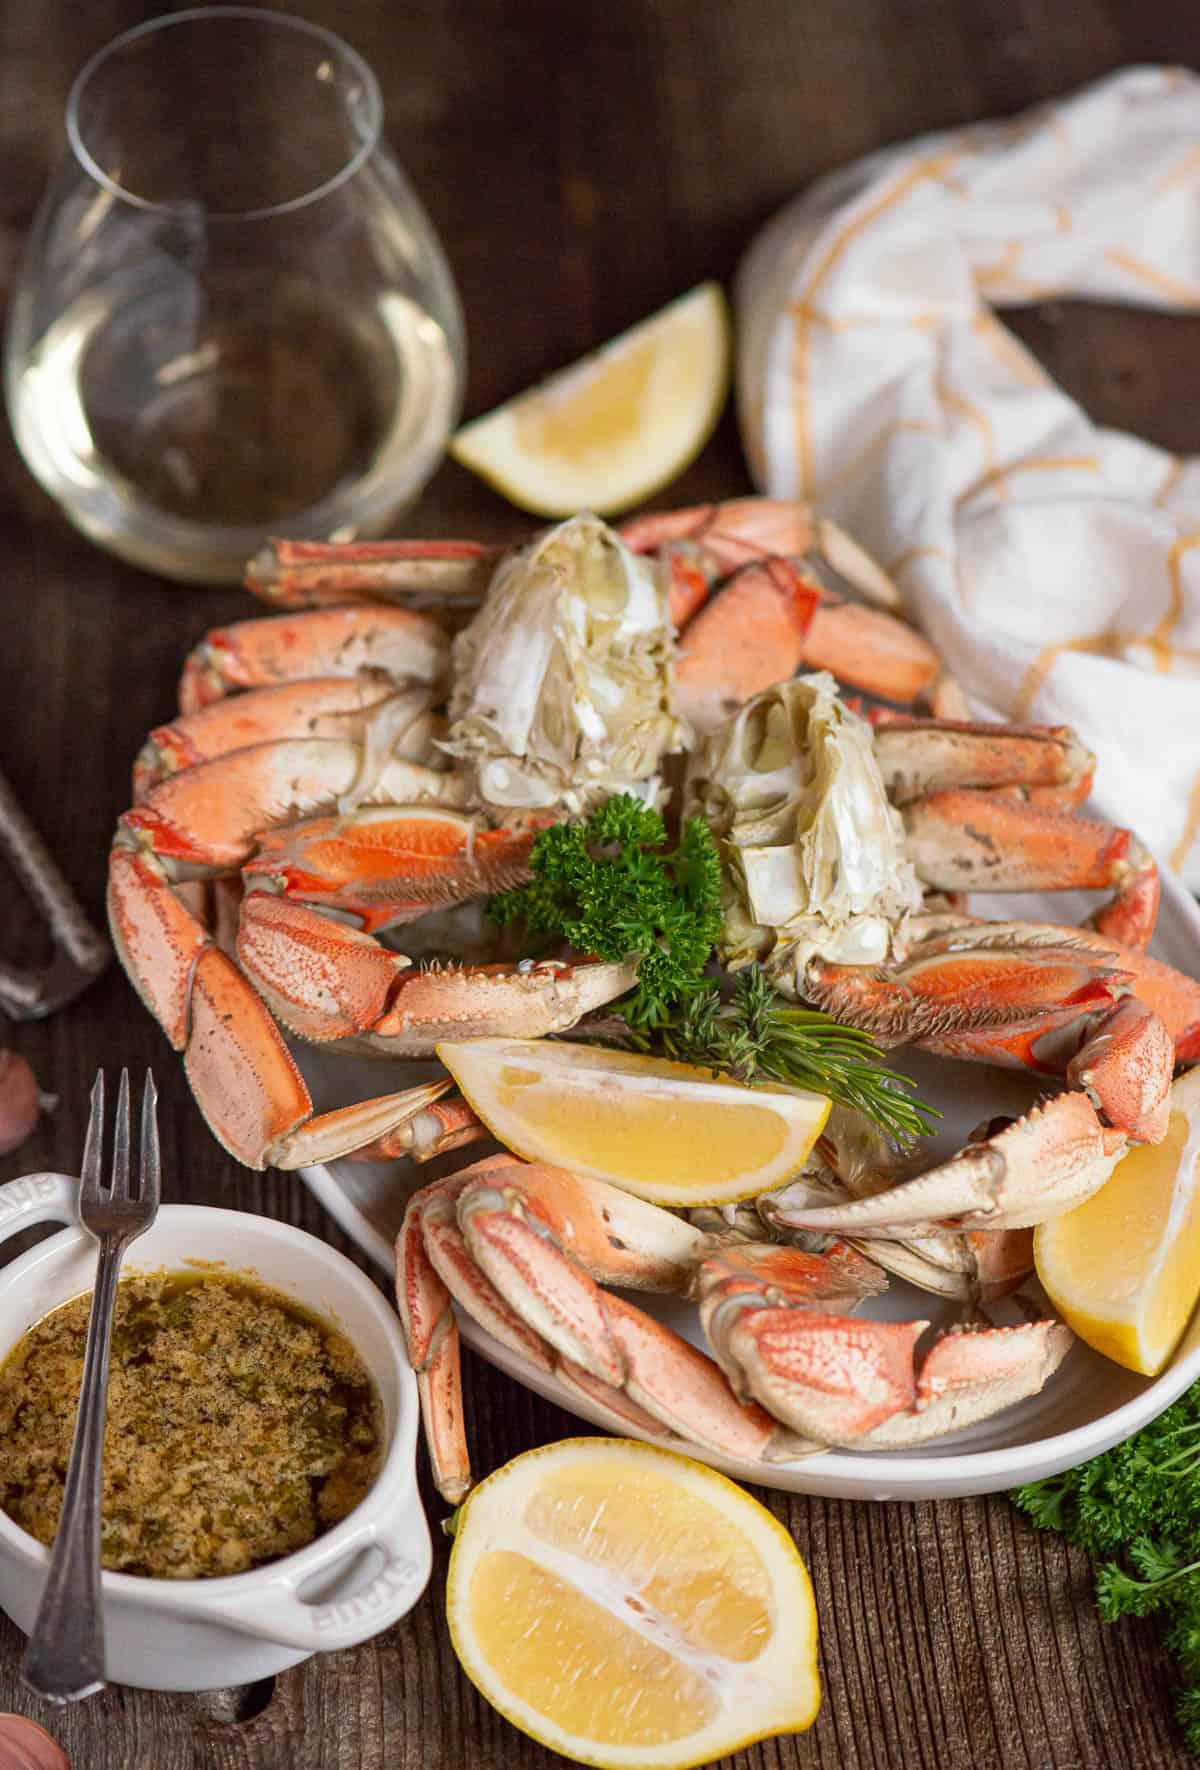 steamed Dungeness crab legs with garlic butter.